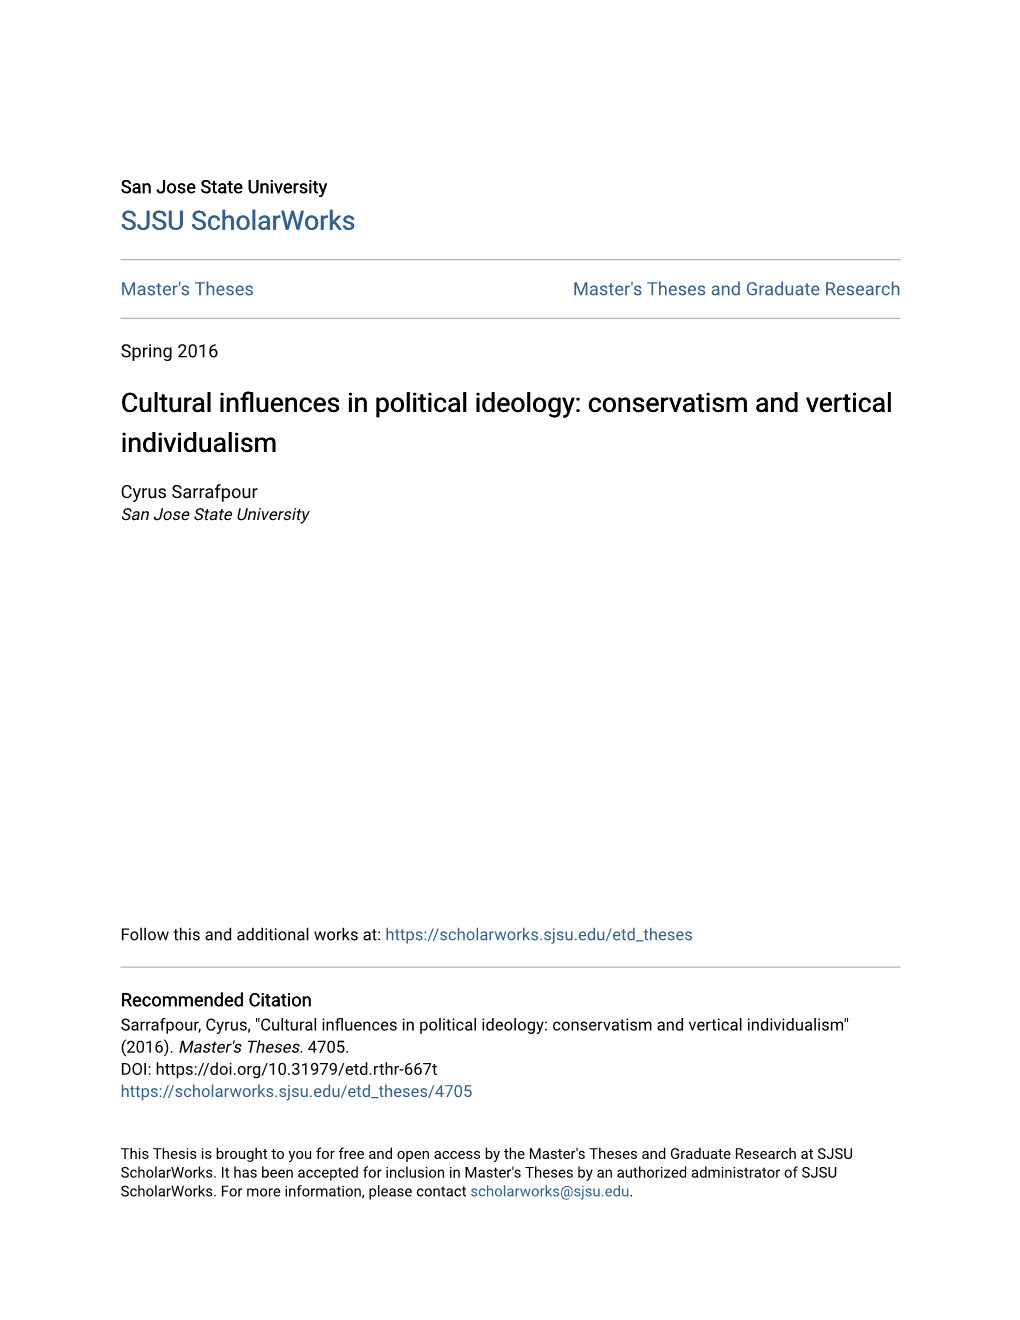 Cultural Influences in Political Ideology: Conservatism and Vertical Individualism